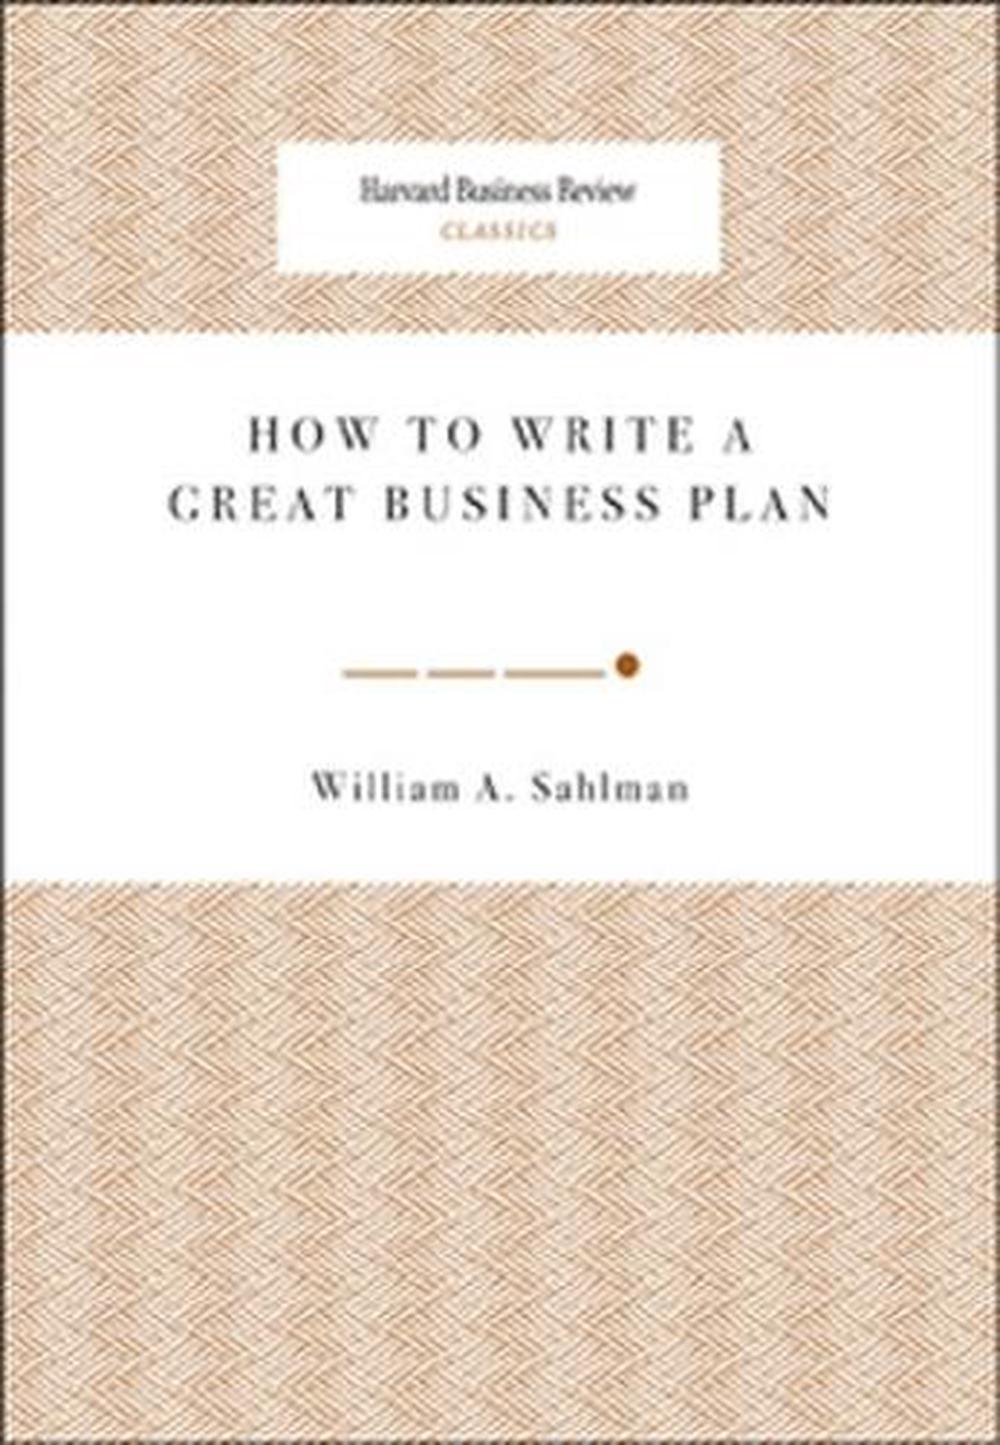 how to write a great business plan william a sahlman